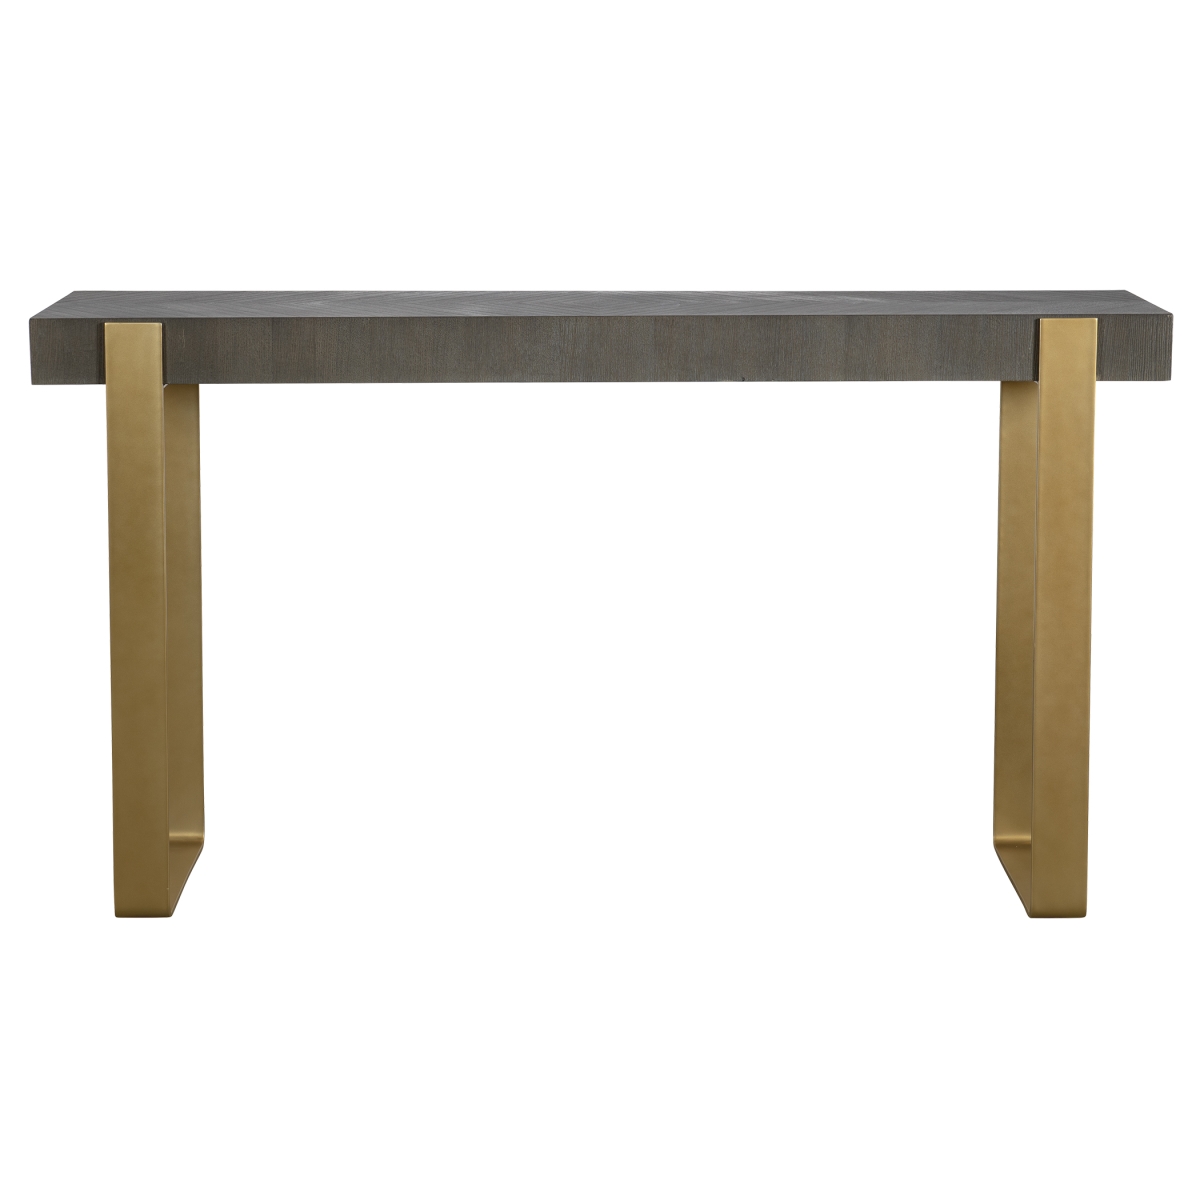 25268 60 in. Kea Contemporary Console Table, Dark Walnut Stain & Brushed Brass -  Uttermost